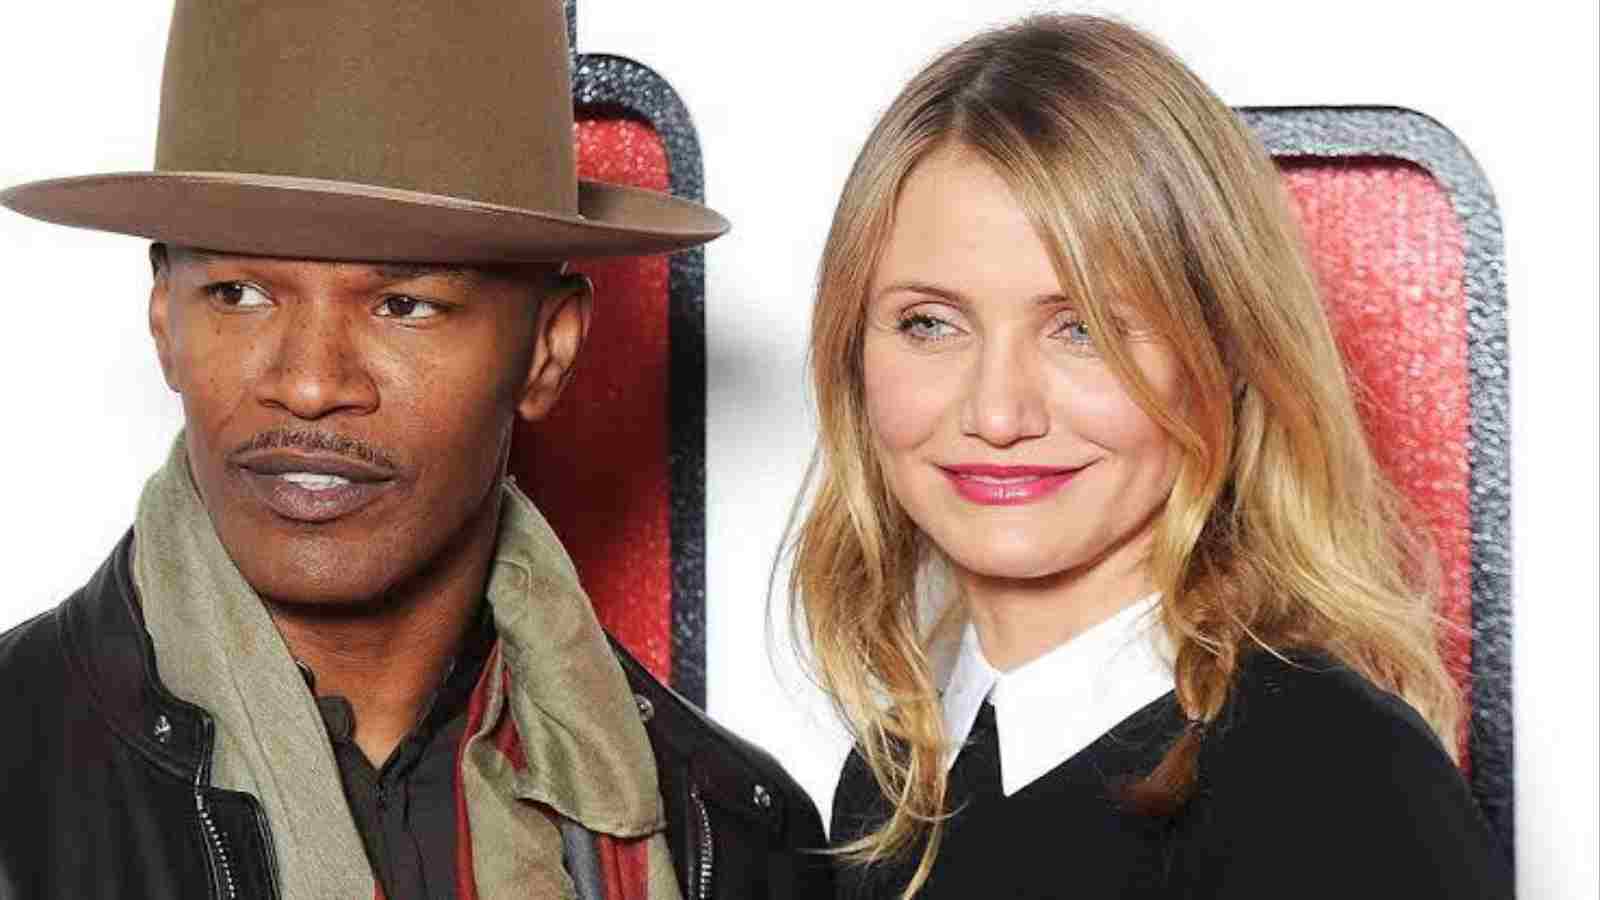 Here's how Jamie Foxx convinced Cameron Diaz to step back into acting